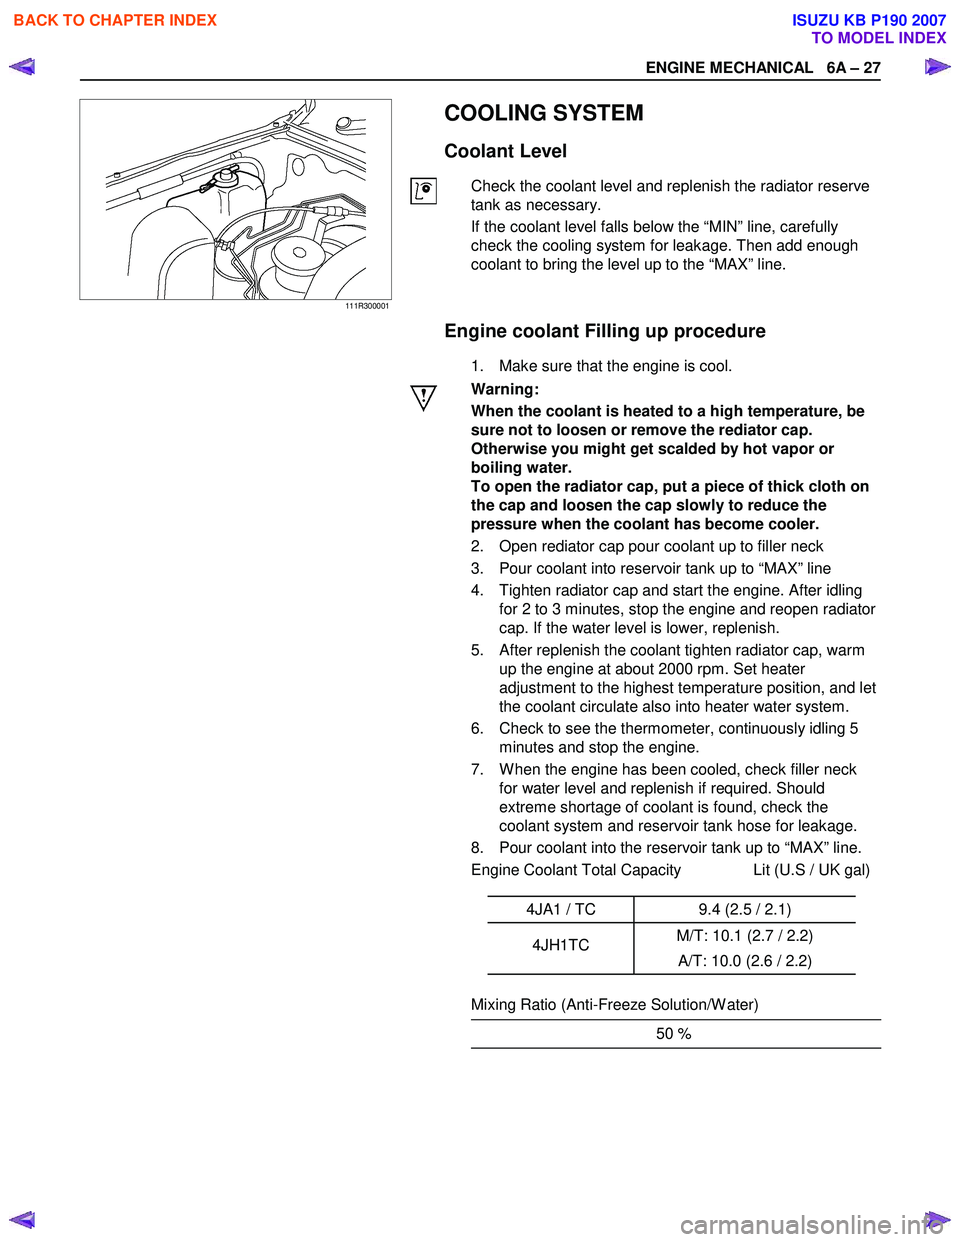 ISUZU KB P190 2007  Workshop Repair Manual ENGINE MECHANICAL   6A – 27 
111R300001 
  
 
 COOLING SYSTEM 
Coolant Level 
Check the coolant level and replenish the radiator reserve  
tank as necessary.  
If the coolant level falls below the �